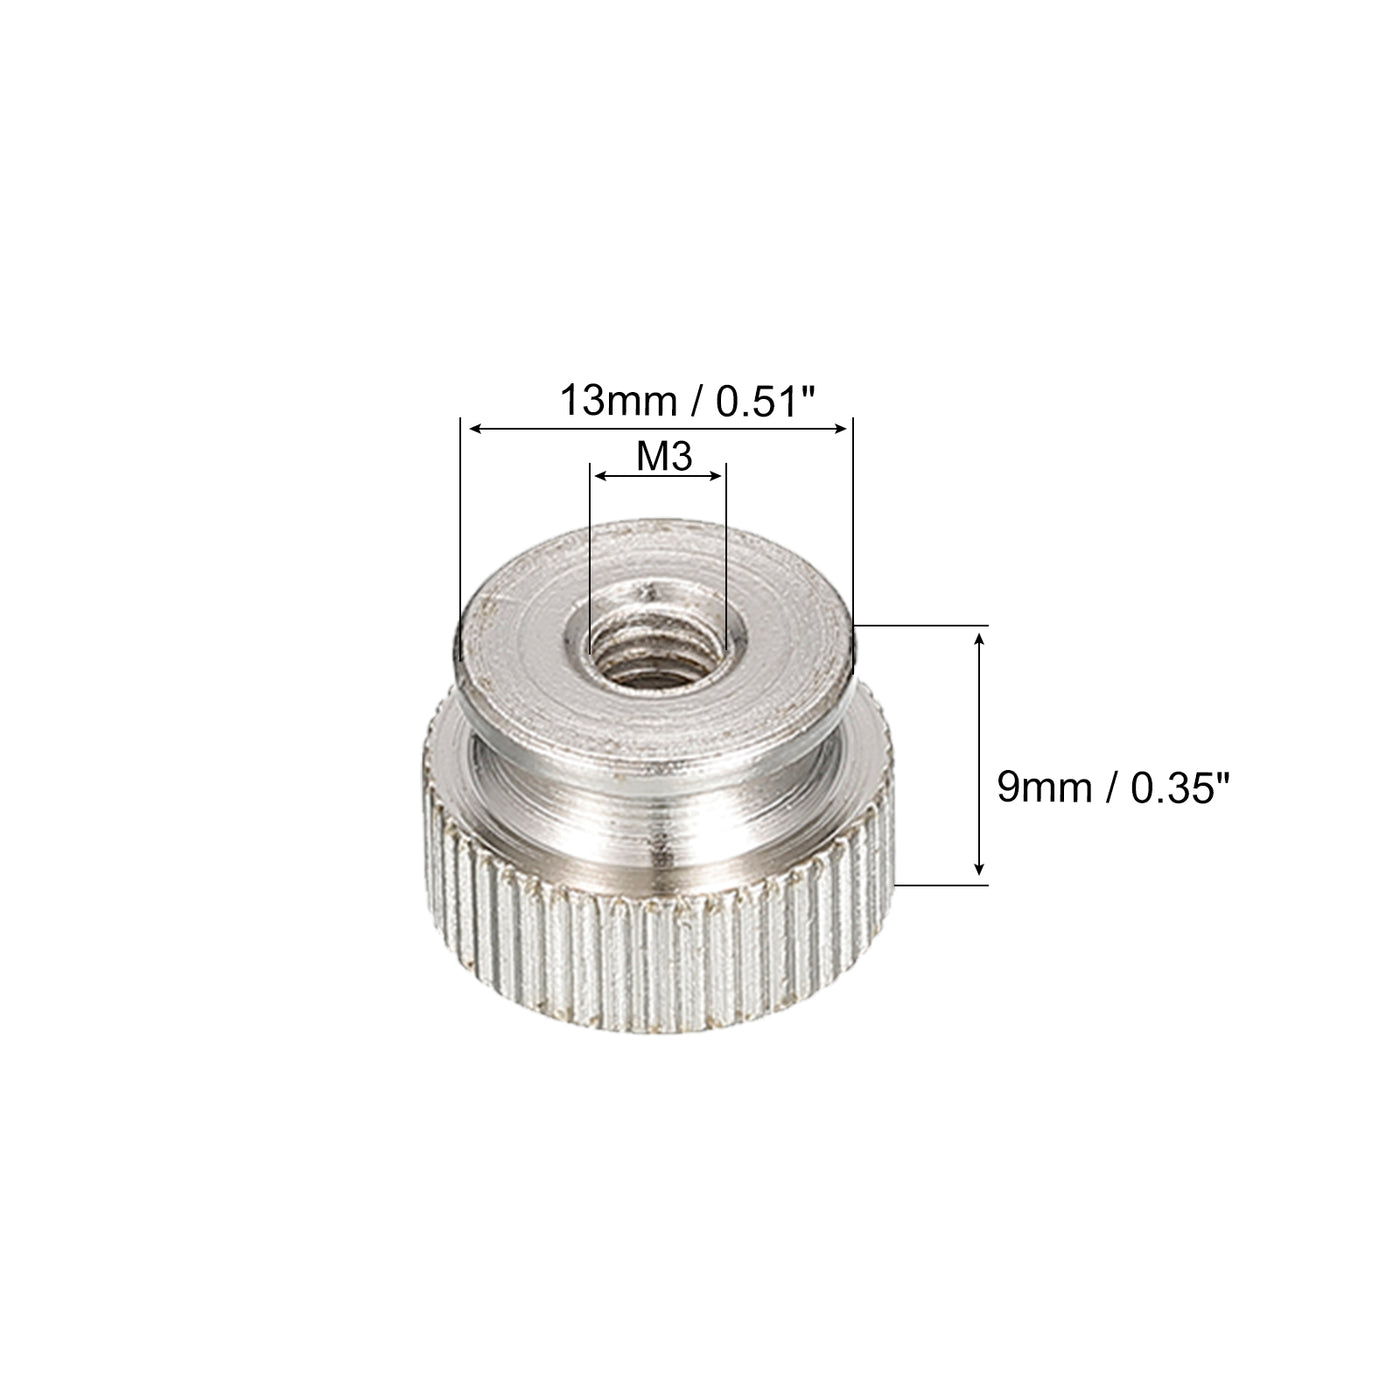 uxcell Uxcell Knurled Thumb Nuts,Carbon Steel Knurled Nut with Collar High Head Blind Hole Knurled Thumb Nuts for 3D Printer Parts